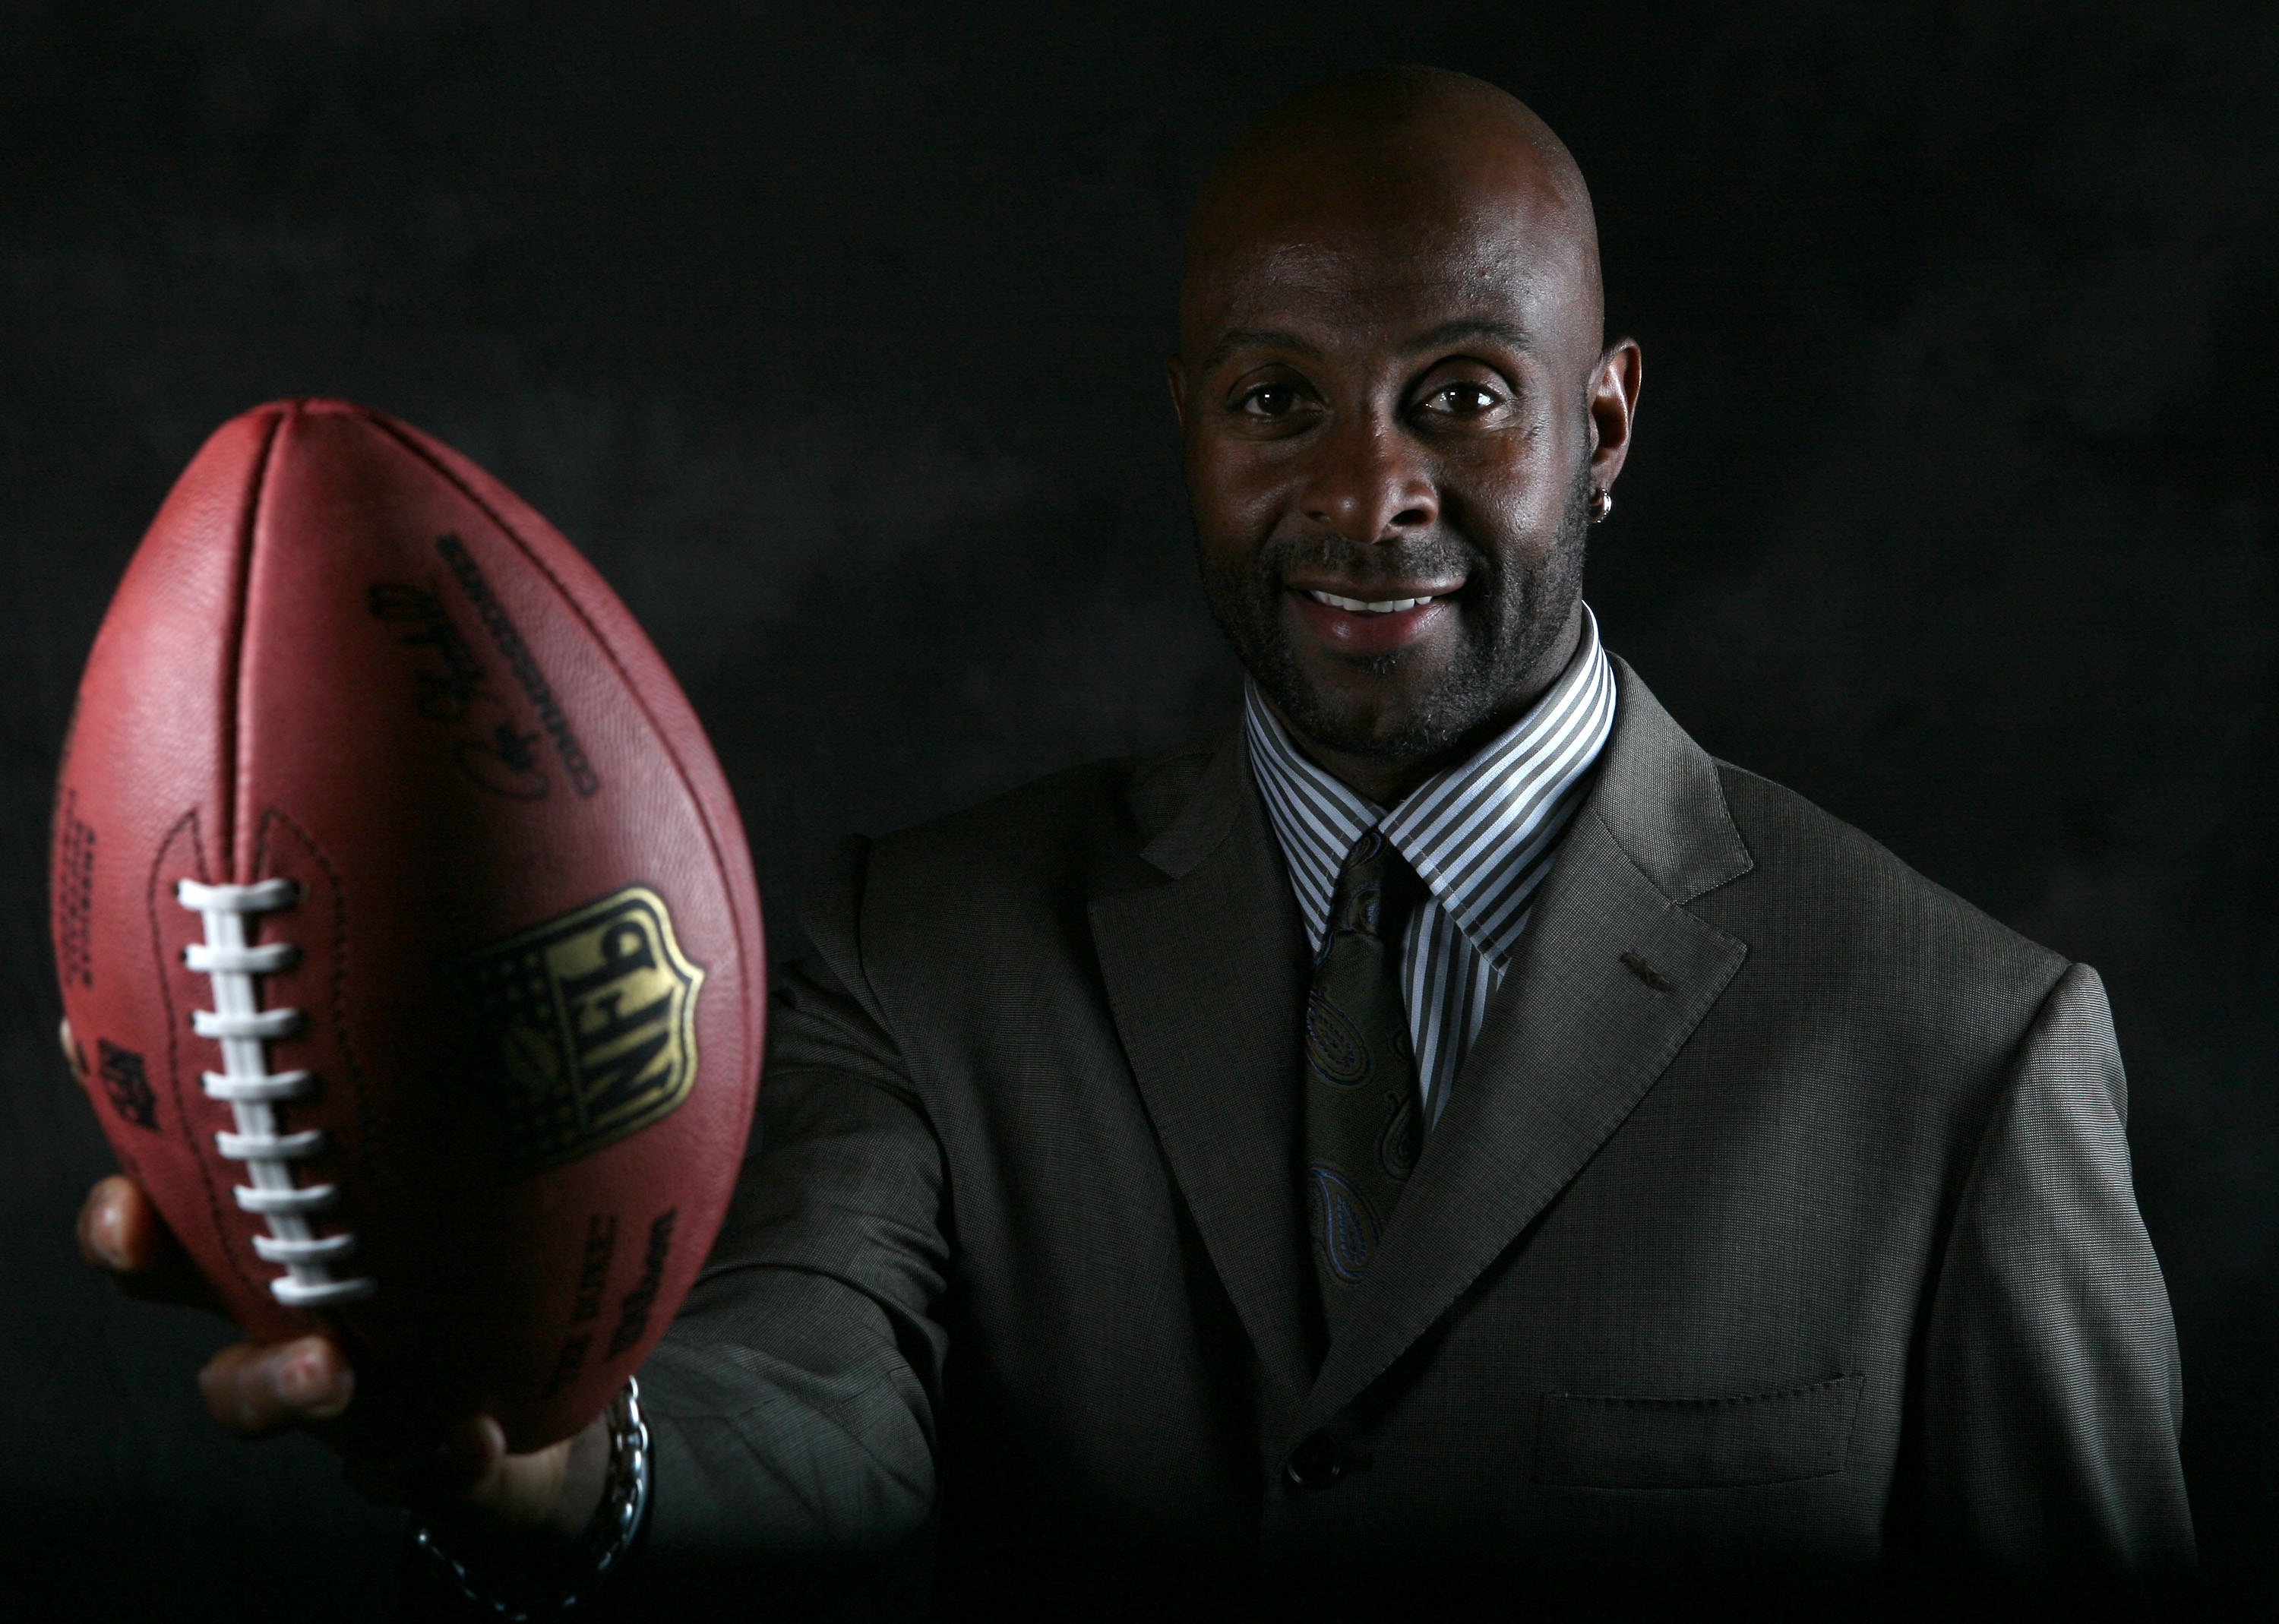 MENLO PARK, CA - OCTOBER 08:  Former NFL player Jerry Rice poses for a portrait at Sharon Heights Golf Club on September 8, 2007 in Menlo Park, California.  (Photo by Jed Jacobsohn/Getty Images)